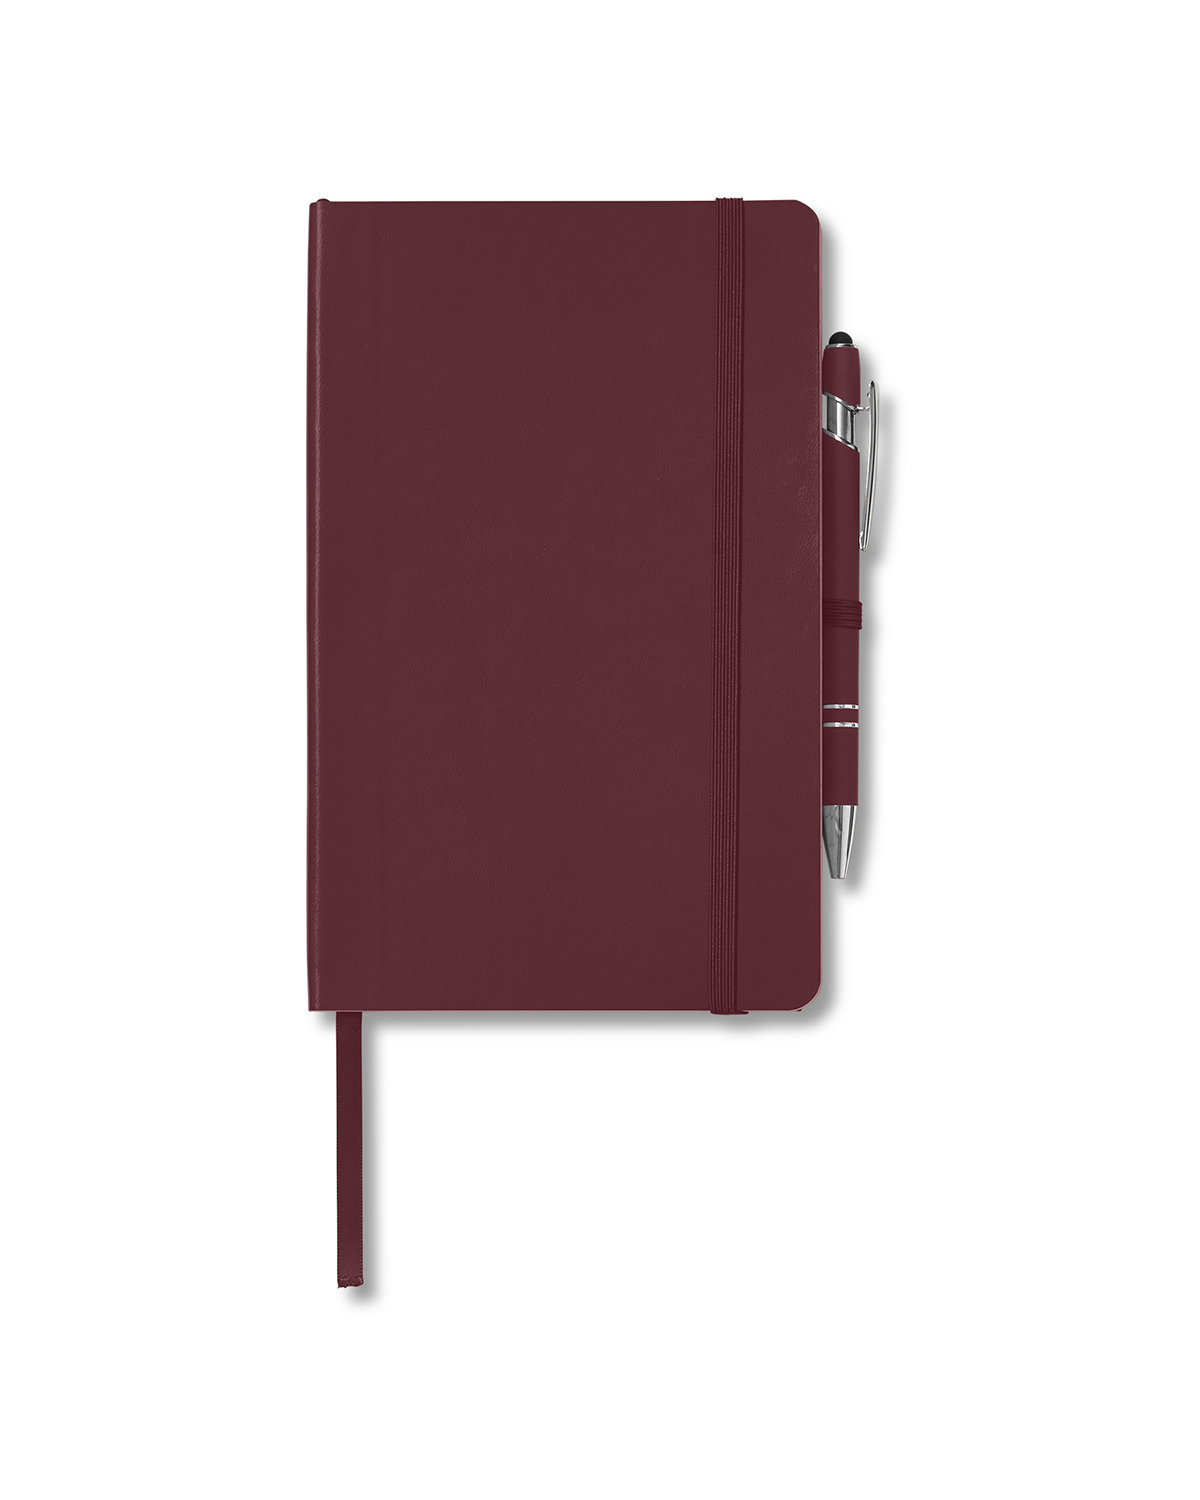 CORE365 Soft Cover Journal And Pen Set burgundy 